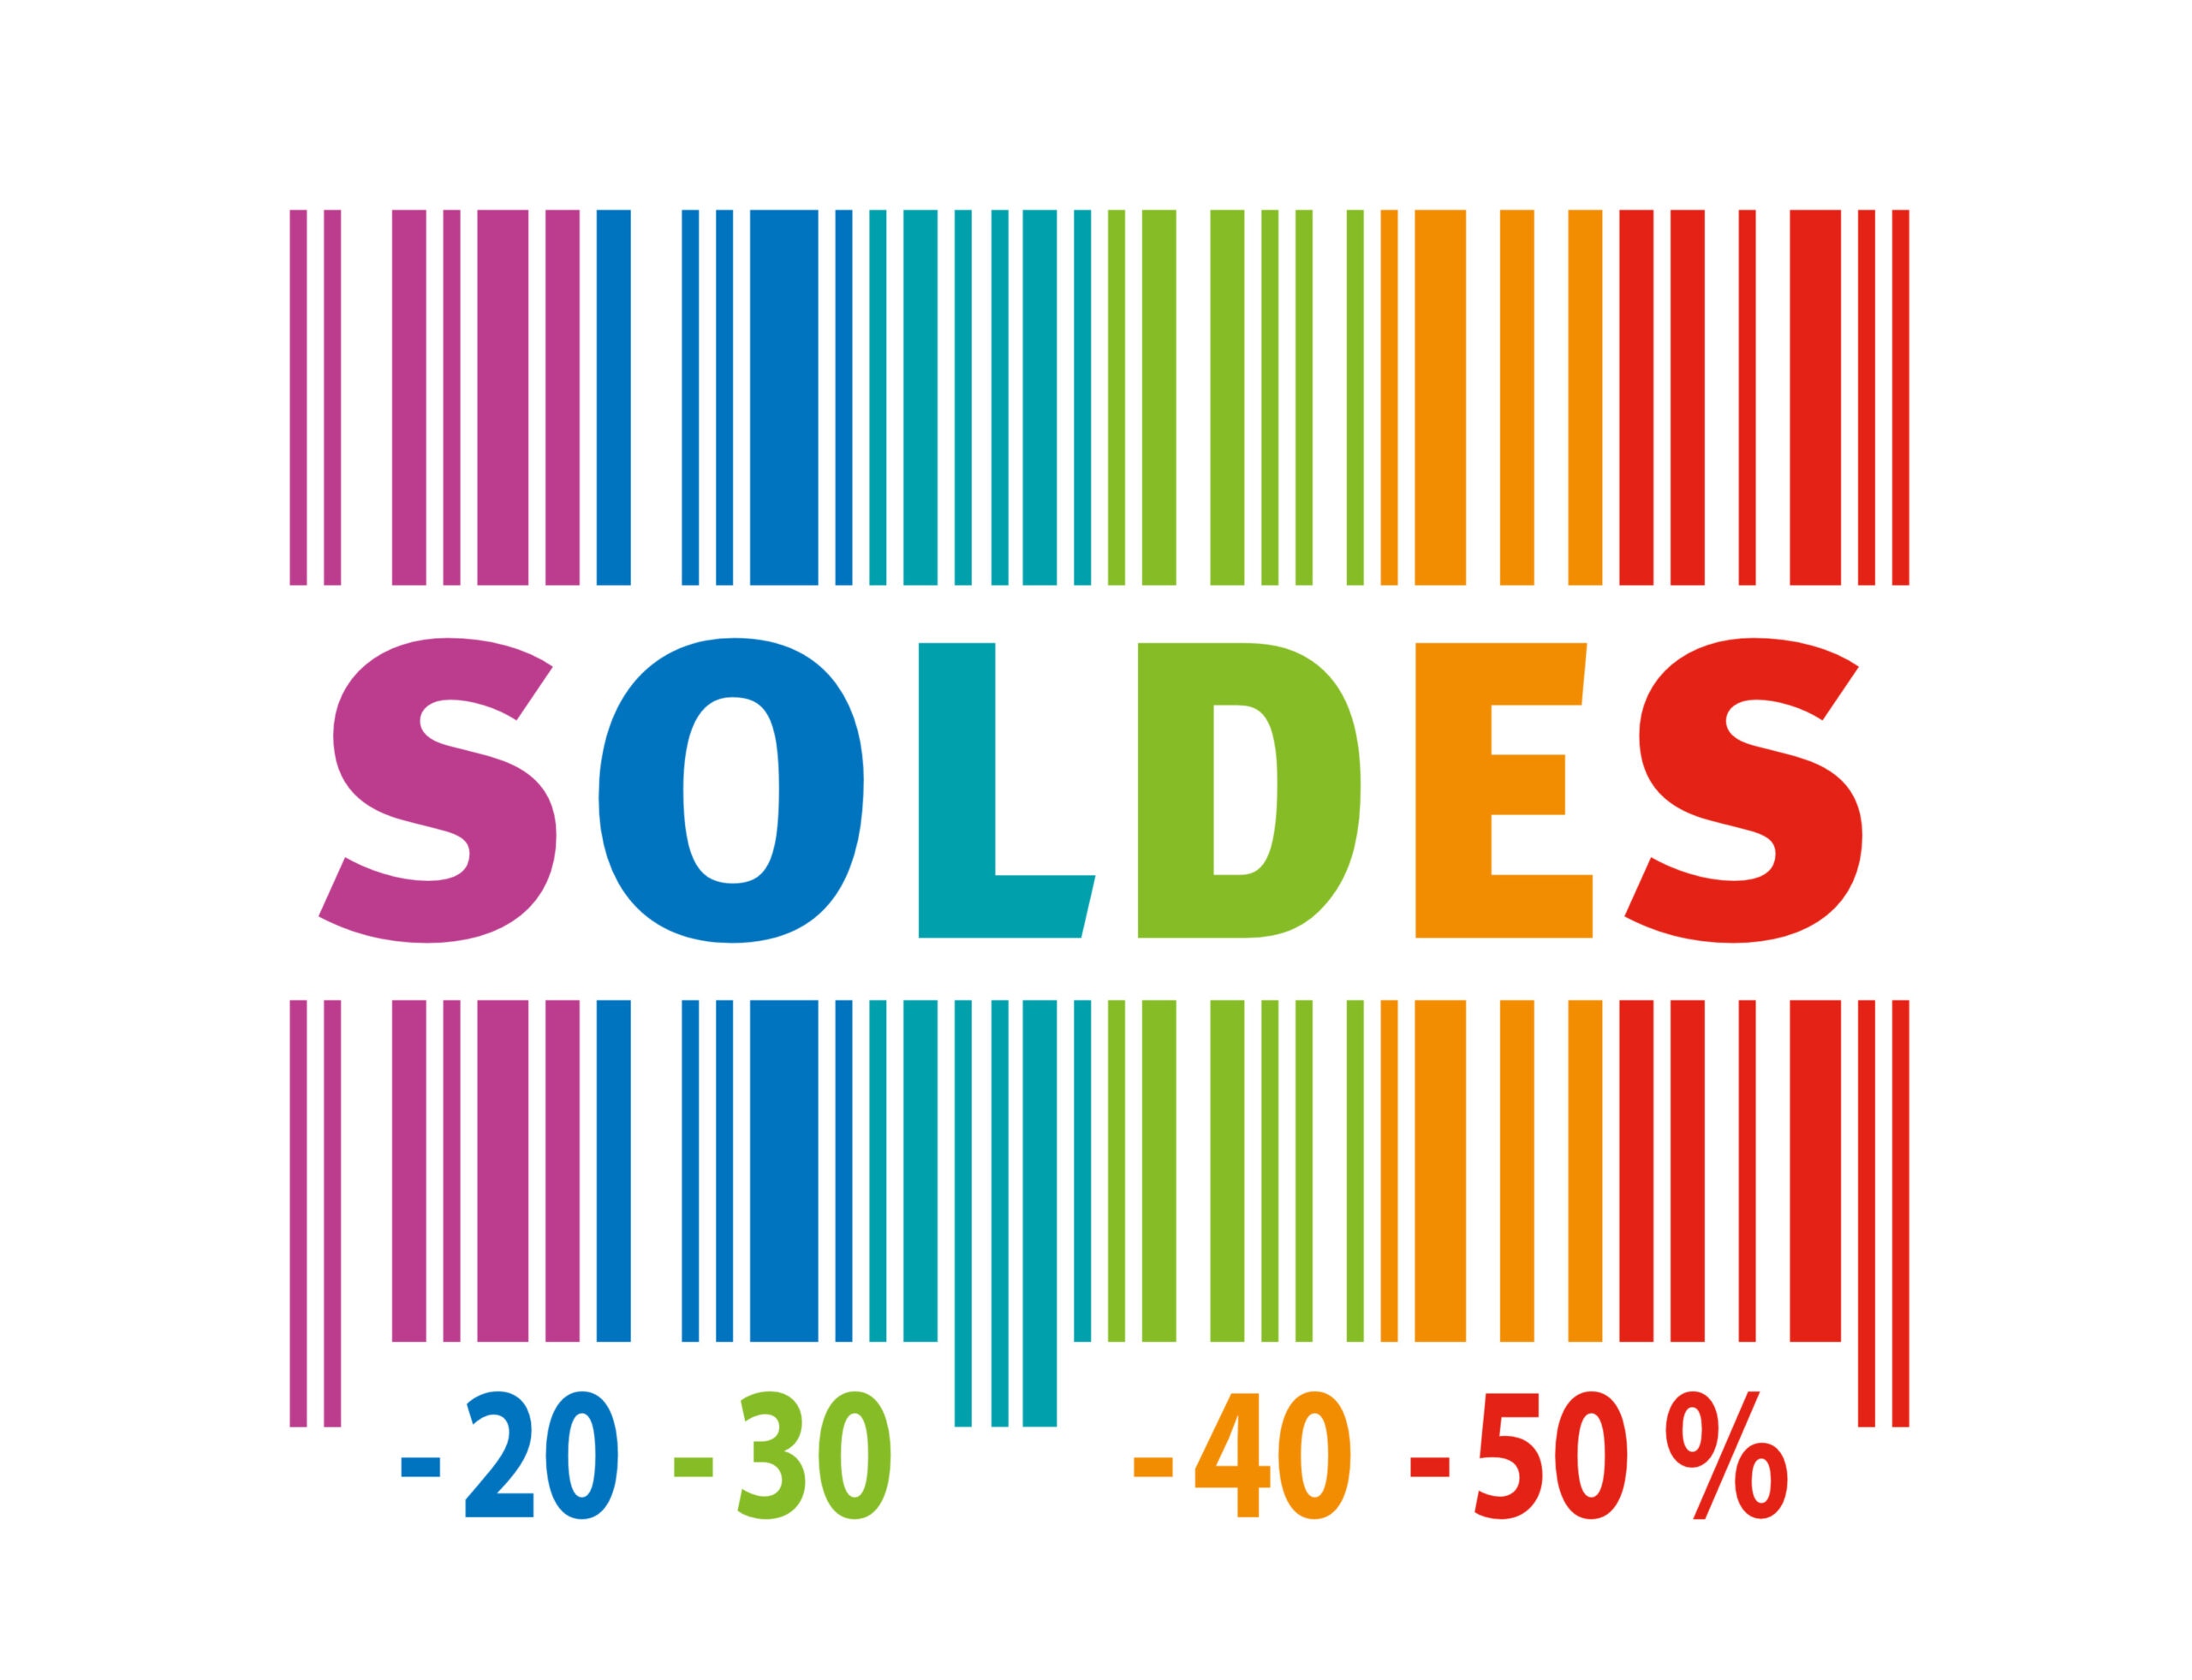 Soldes Outillage